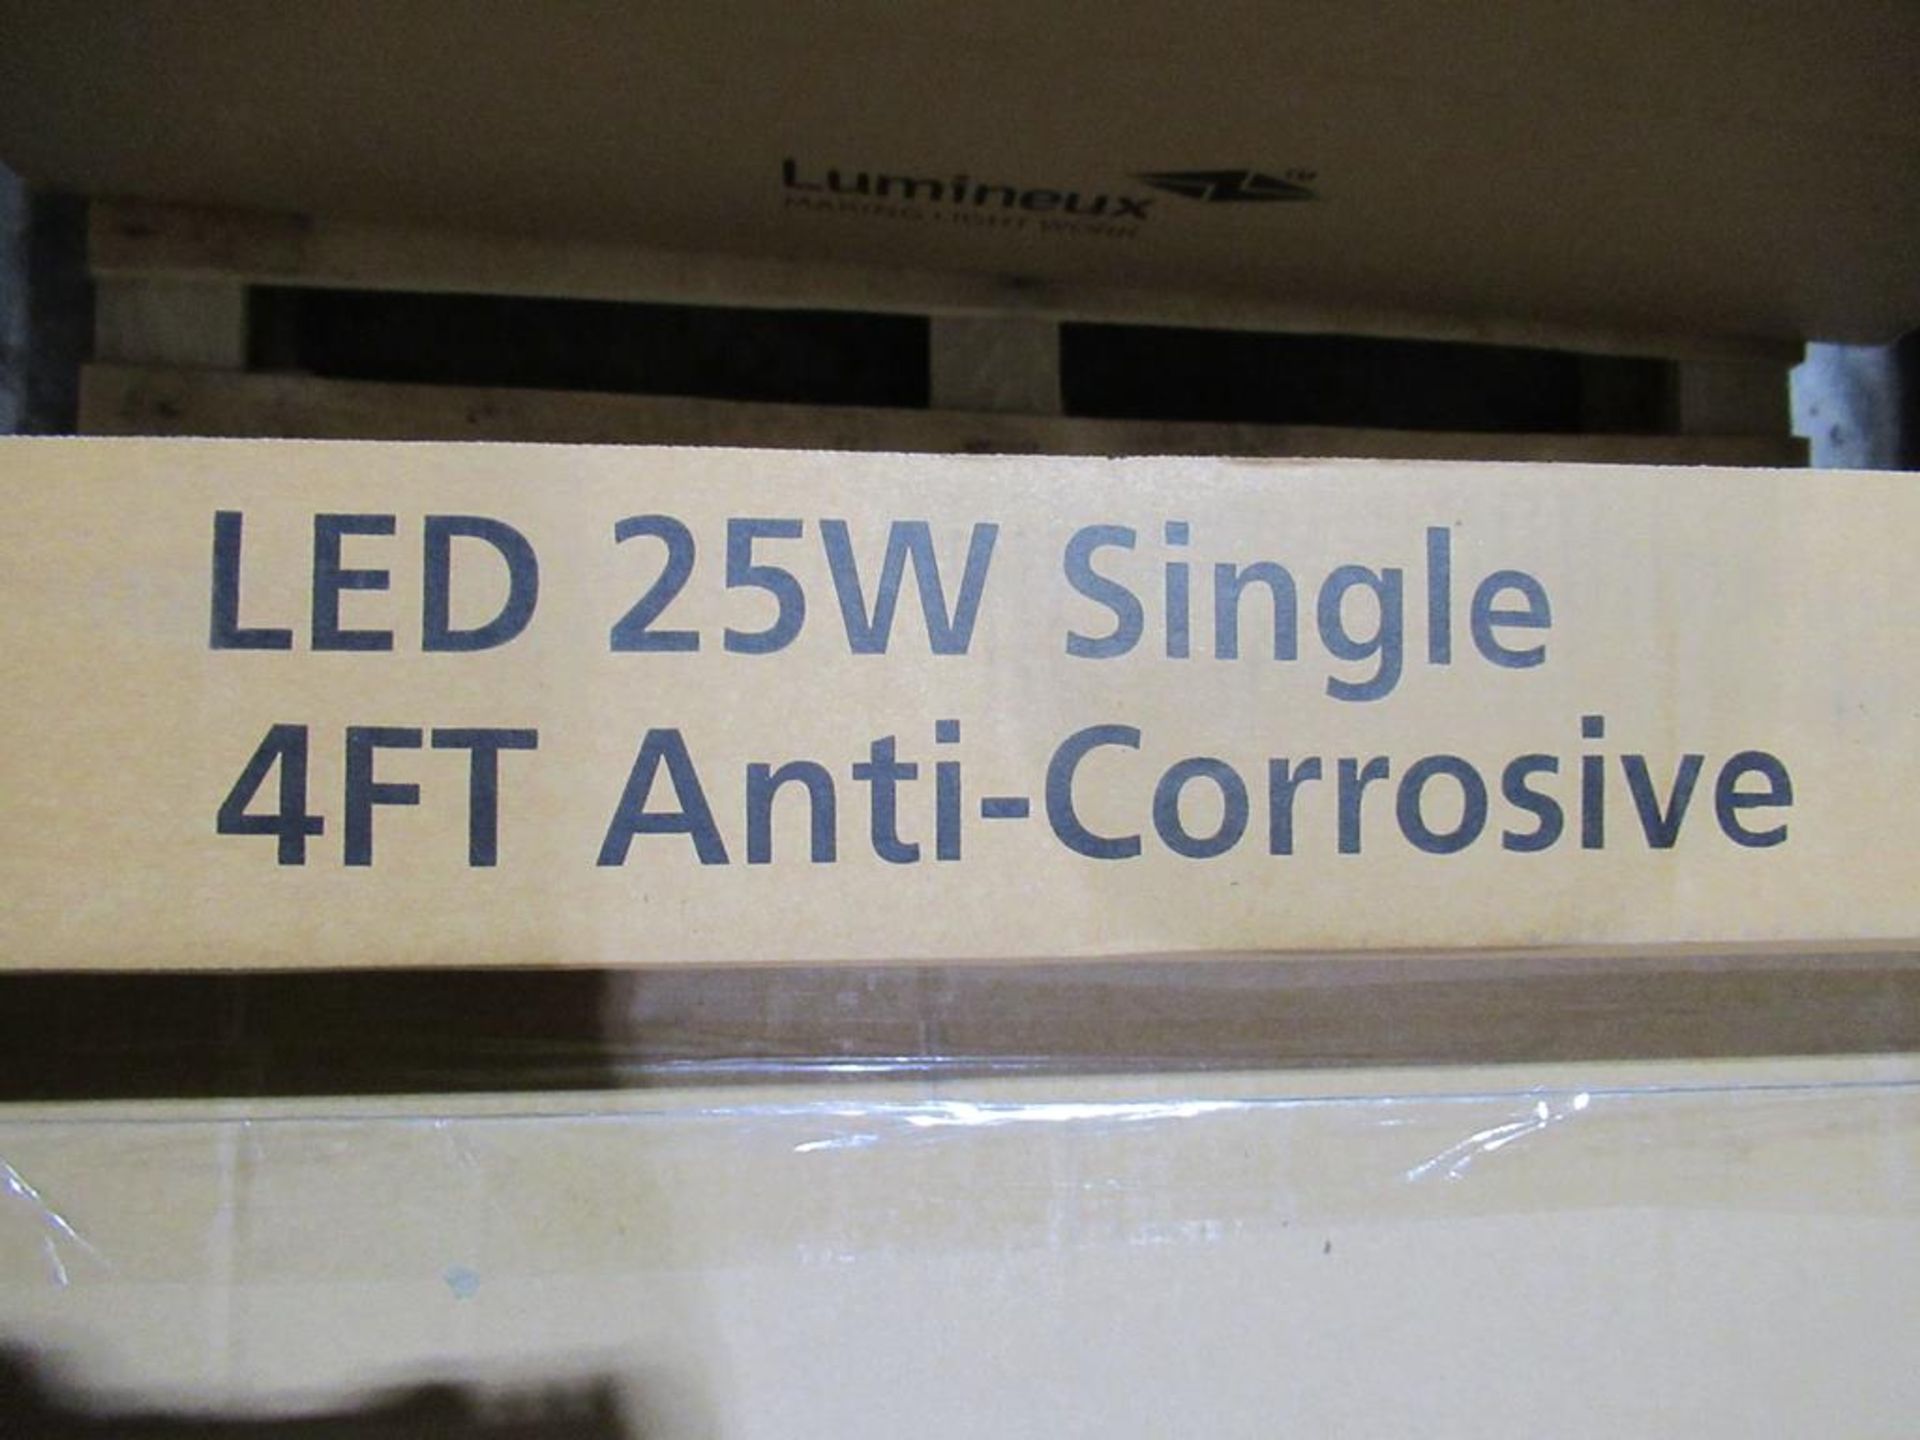 19 x LED 4ft Anti-Corrosive 25W 5000K Single with Tridonic Drivers OEM Trade Price £380 - Image 2 of 3